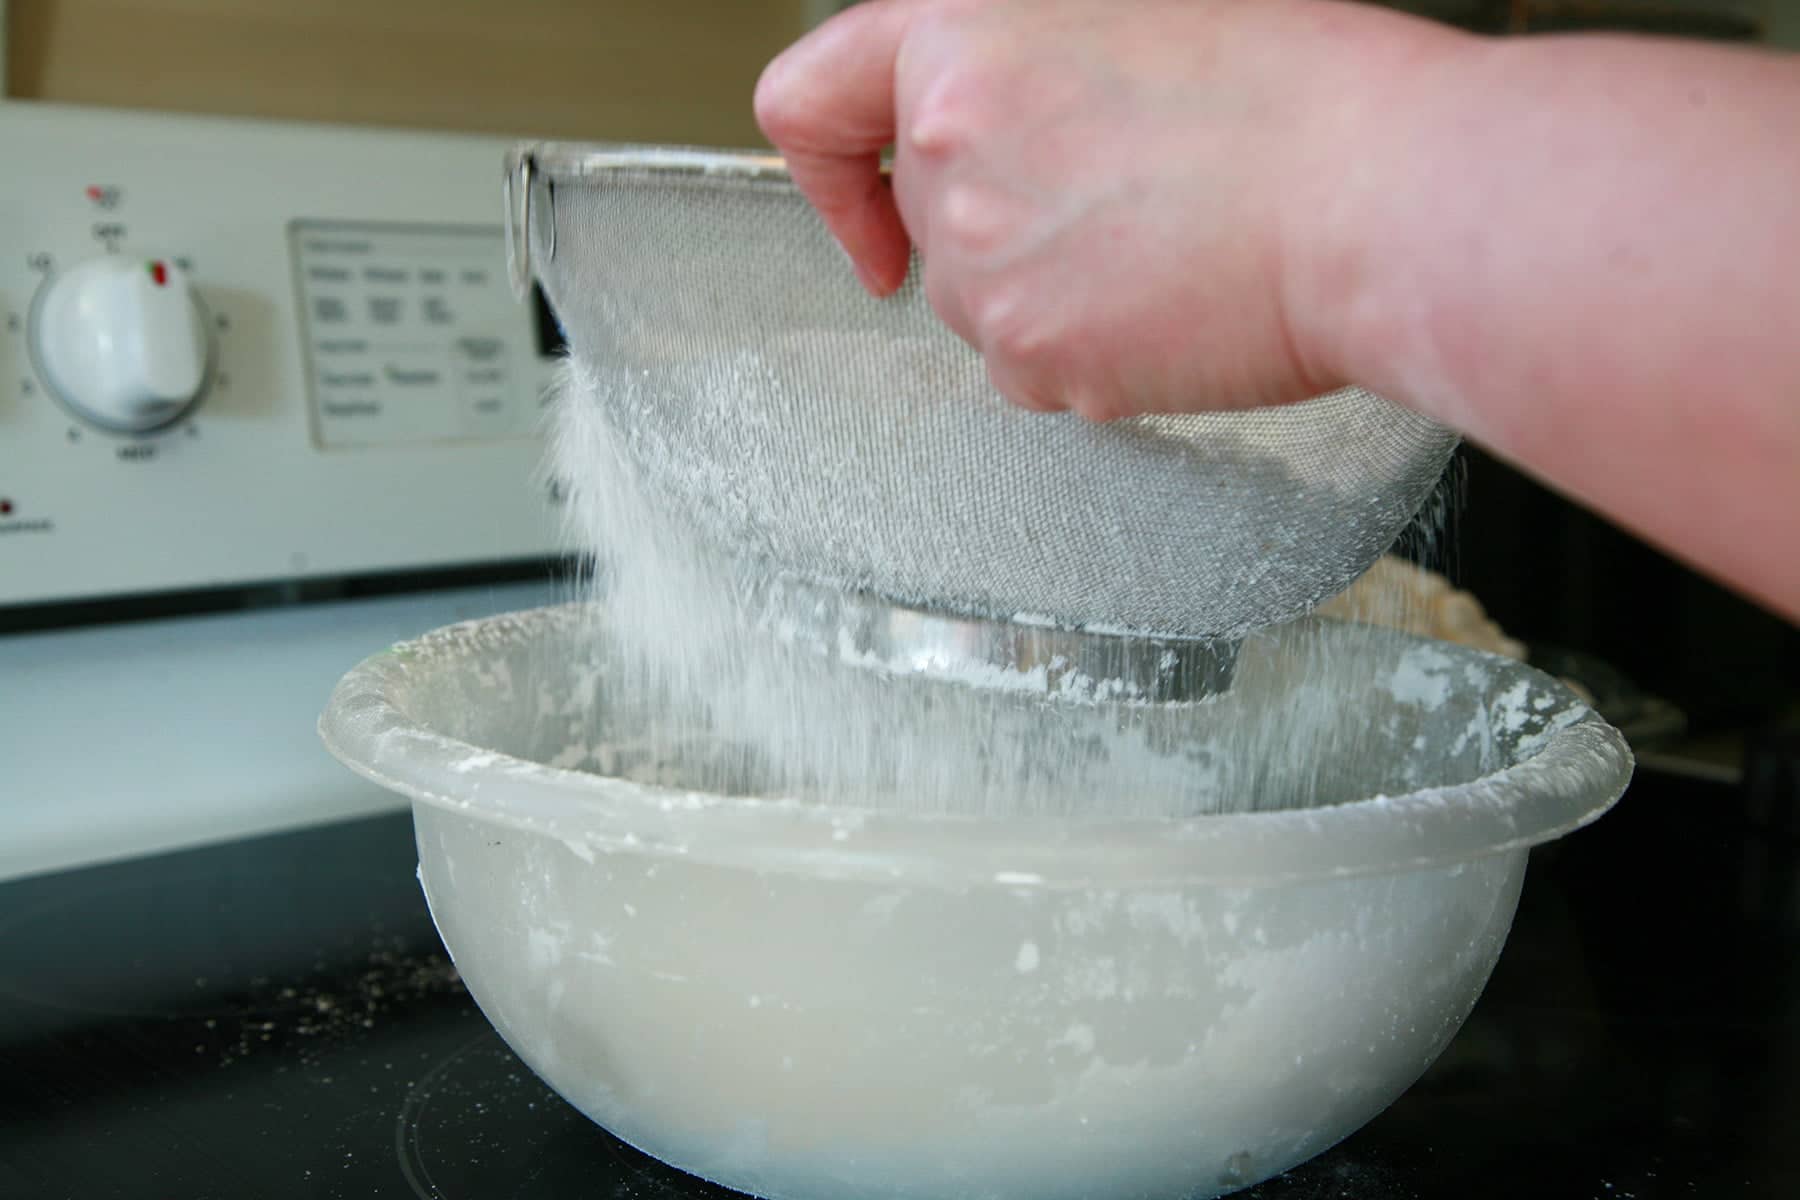 A hand holds a wire strainer over a large bowl, sifting powdered sugar into it.